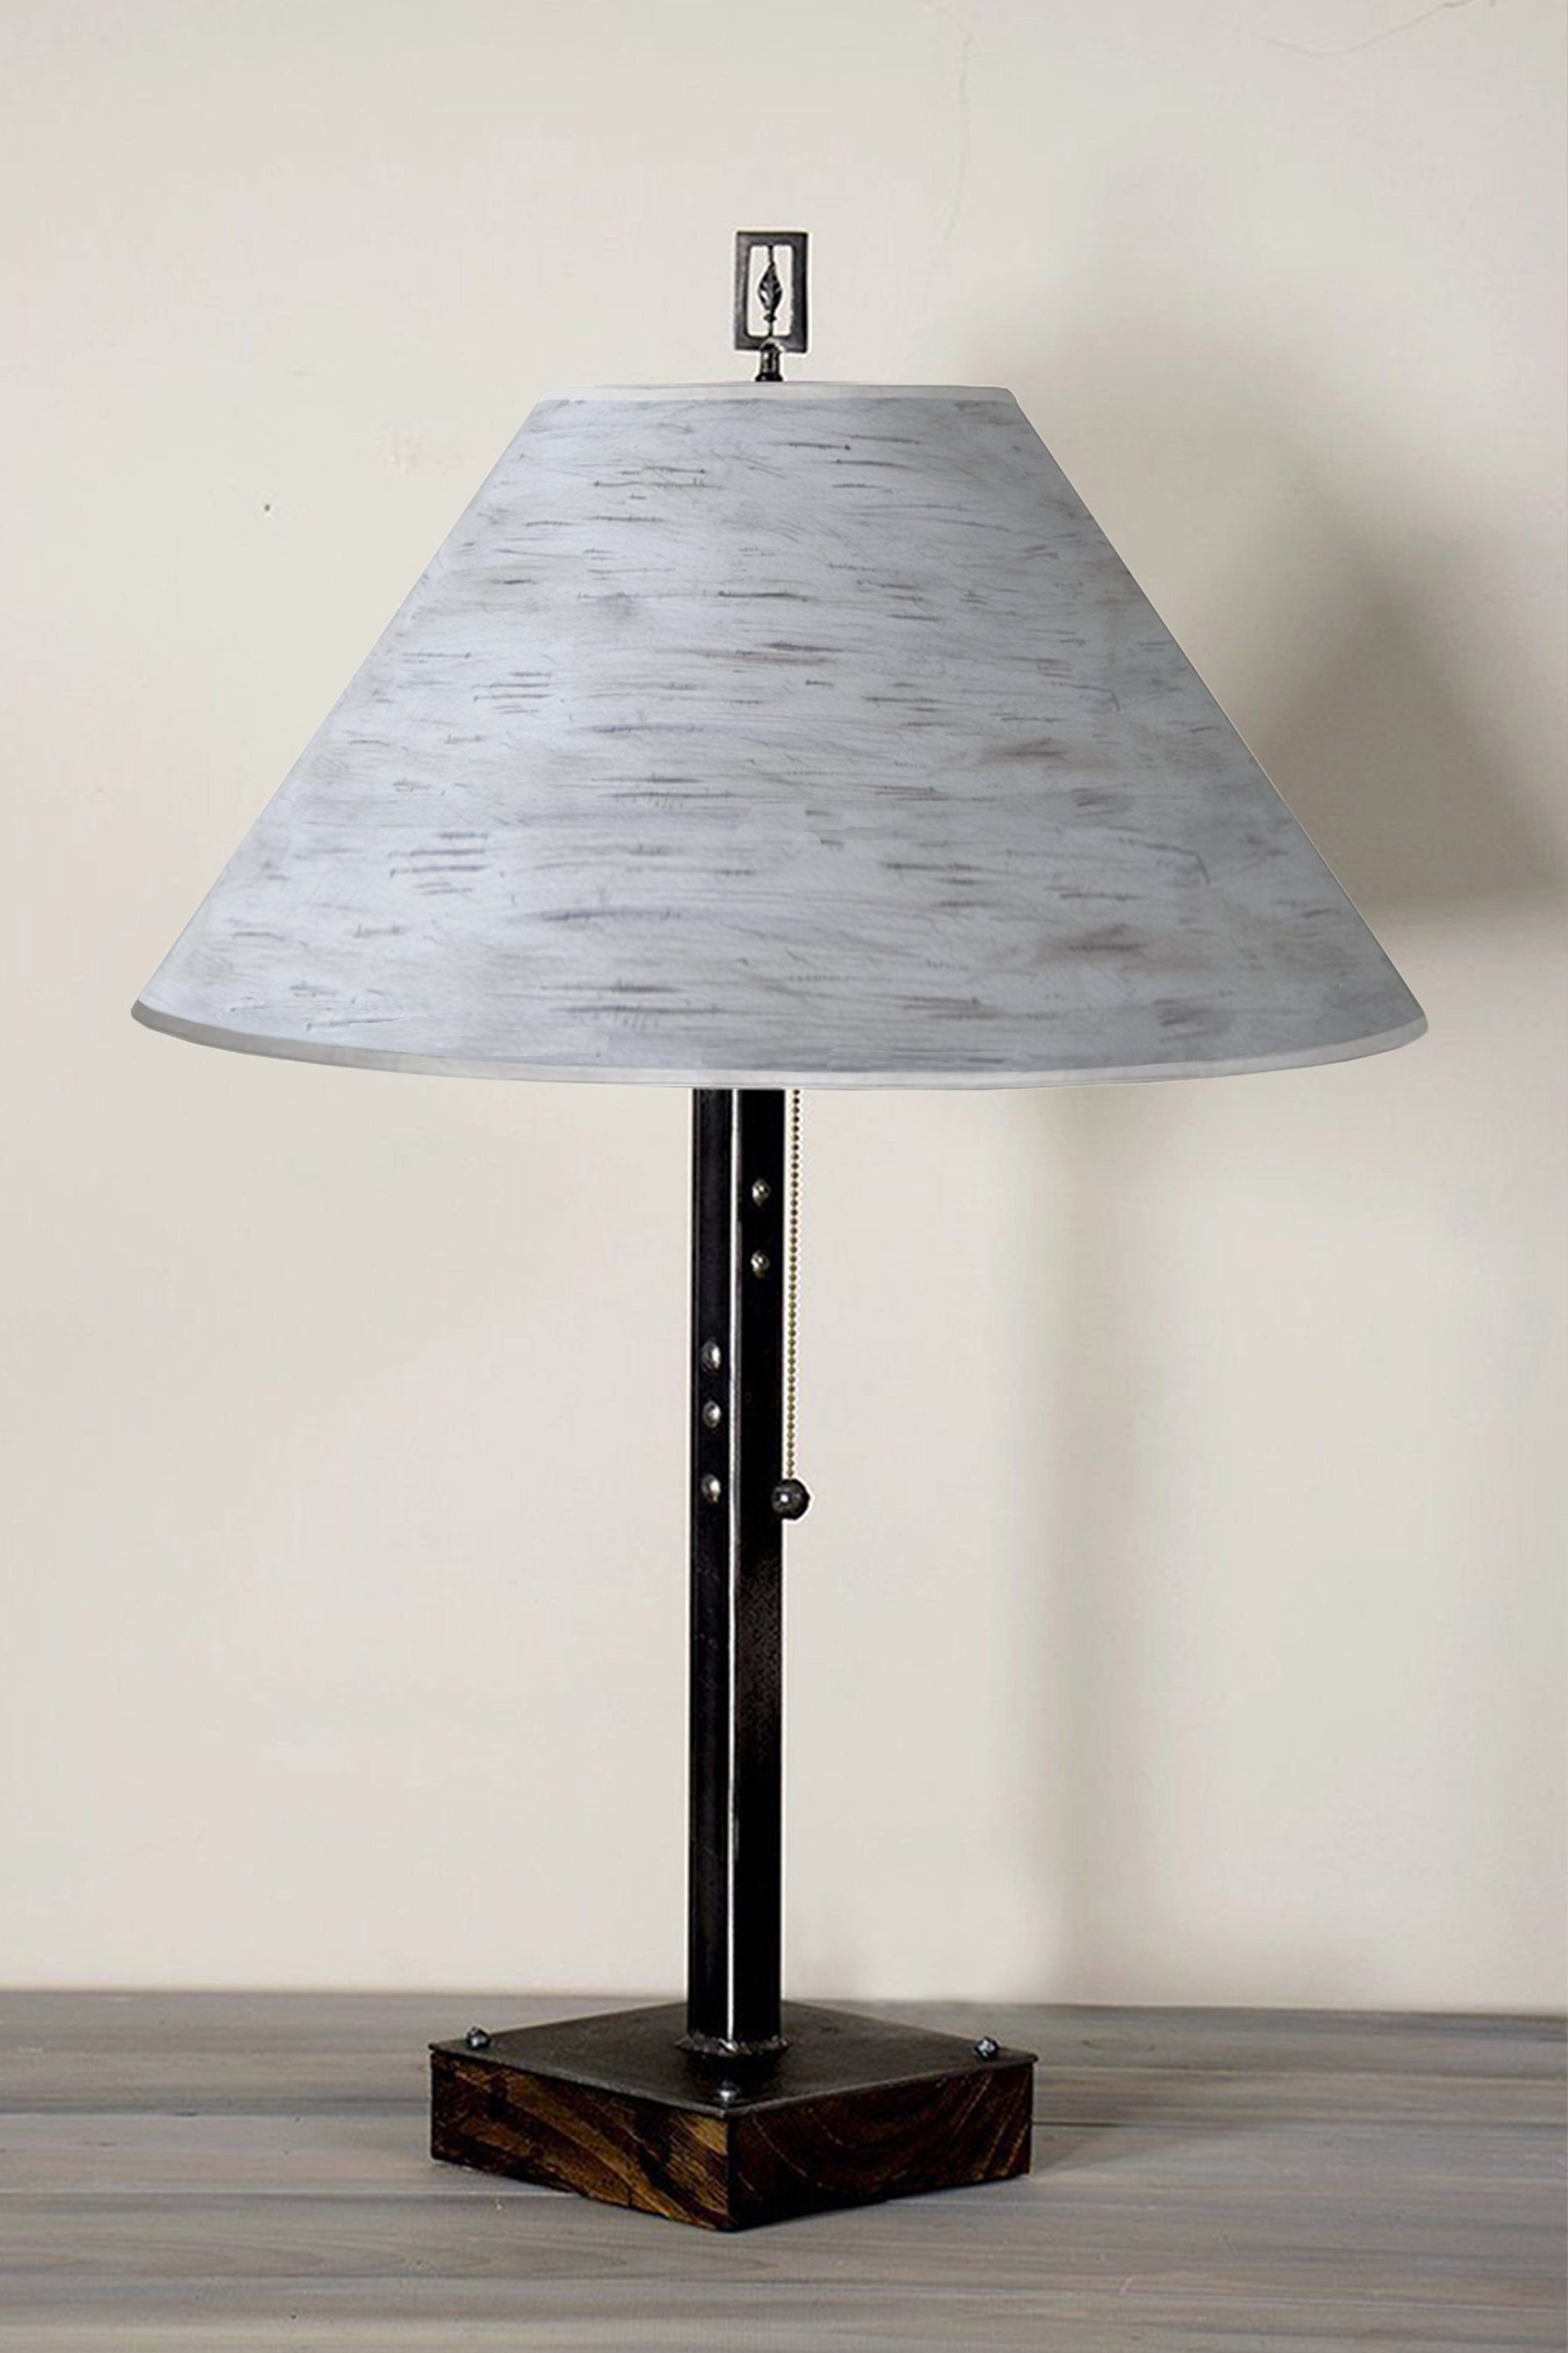 Janna Ugone & Co Table Lamps Steel Table Lamp on Wood with Large Conical Shade in Simply Birch